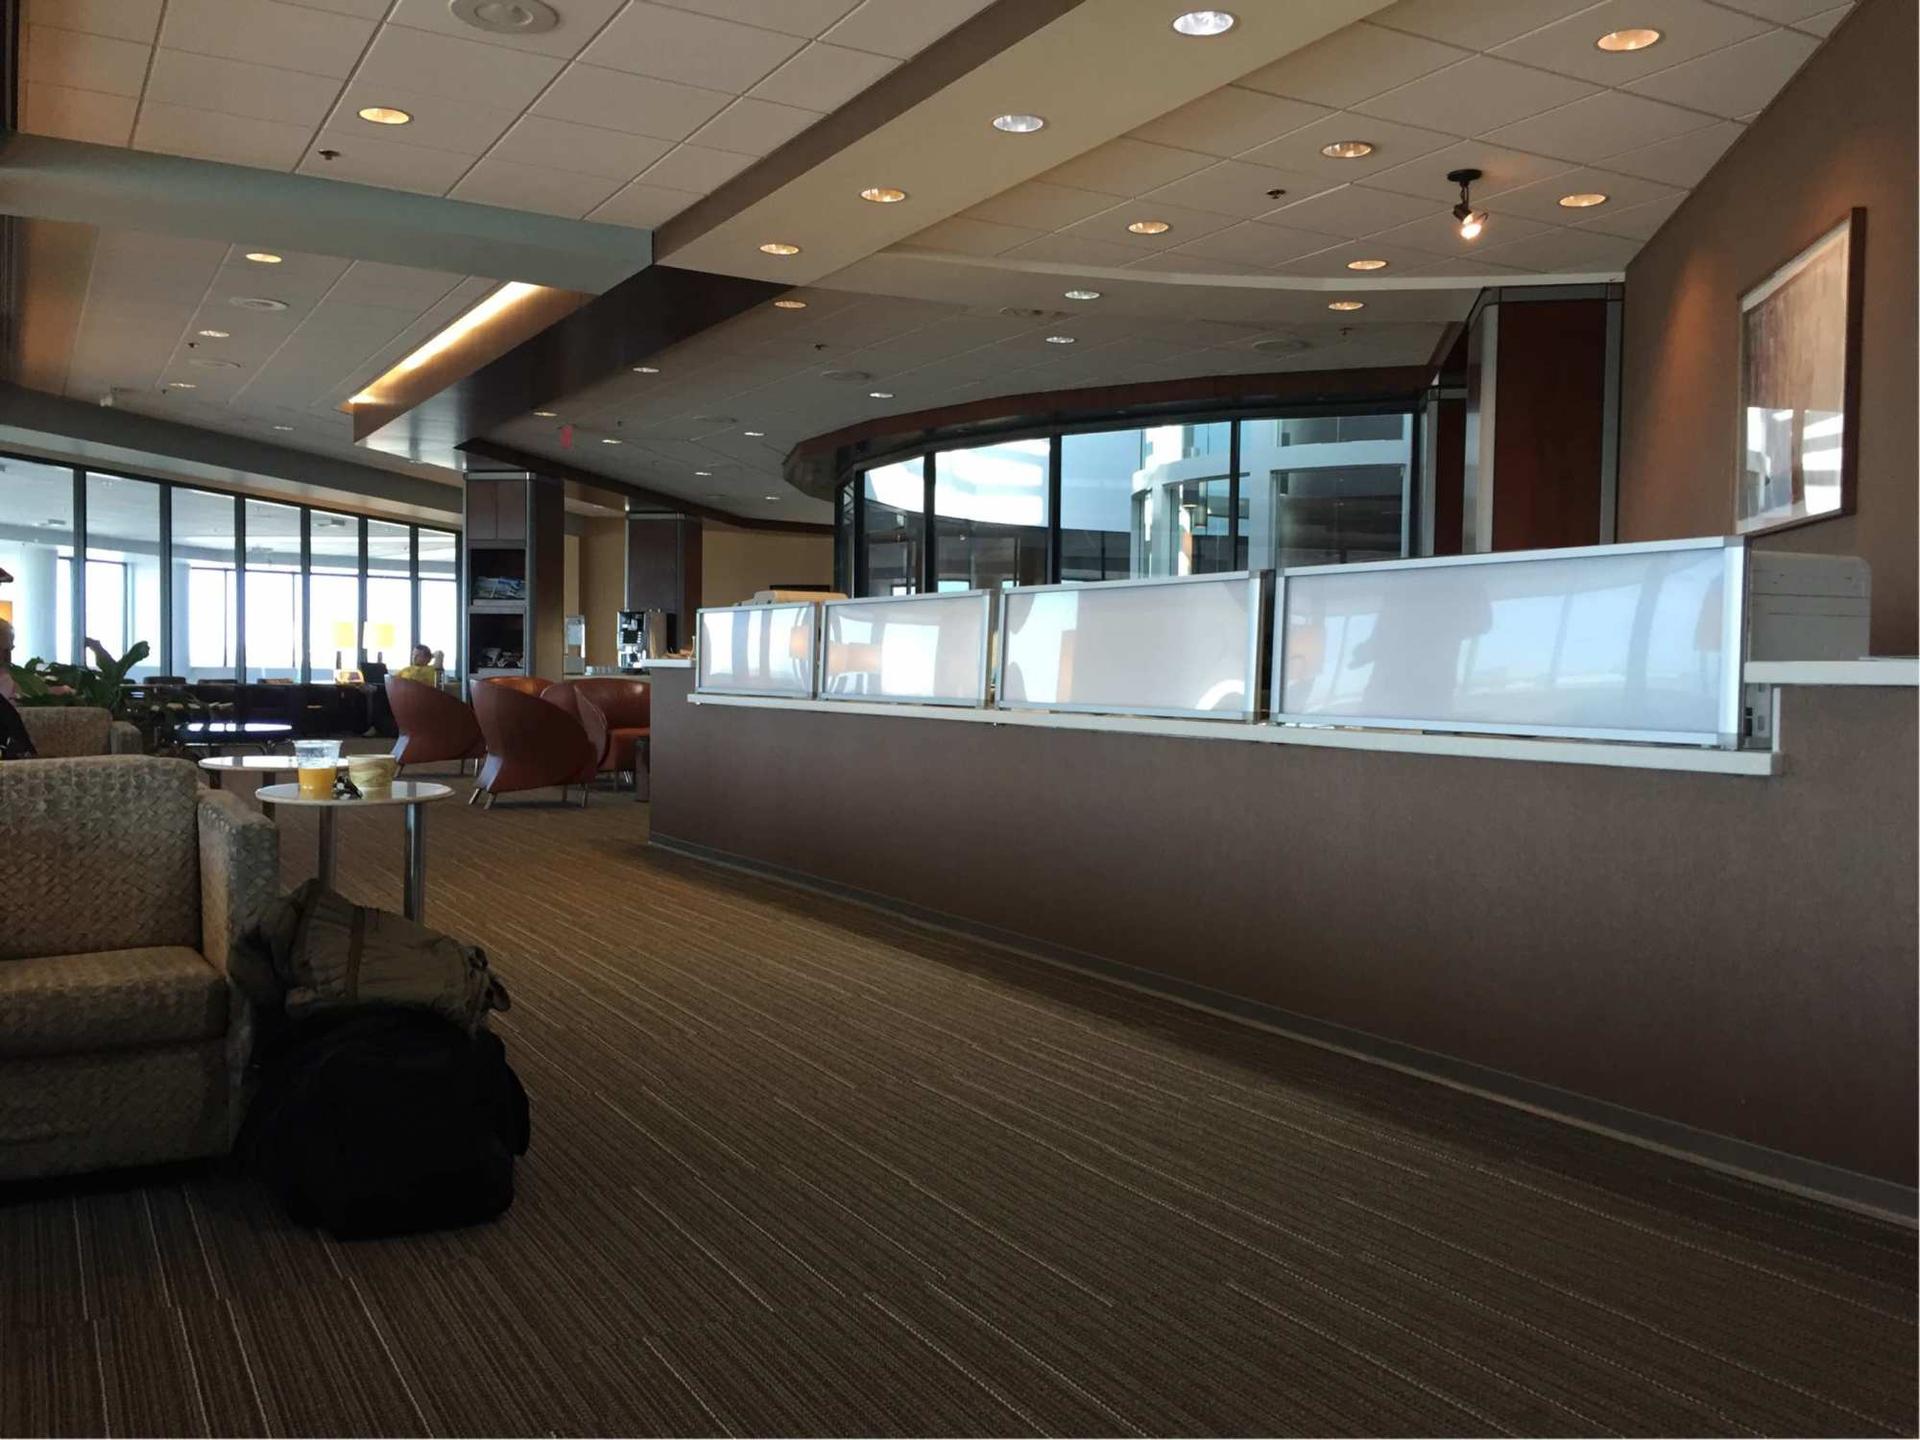 American Airlines Admirals Club image 12 of 16